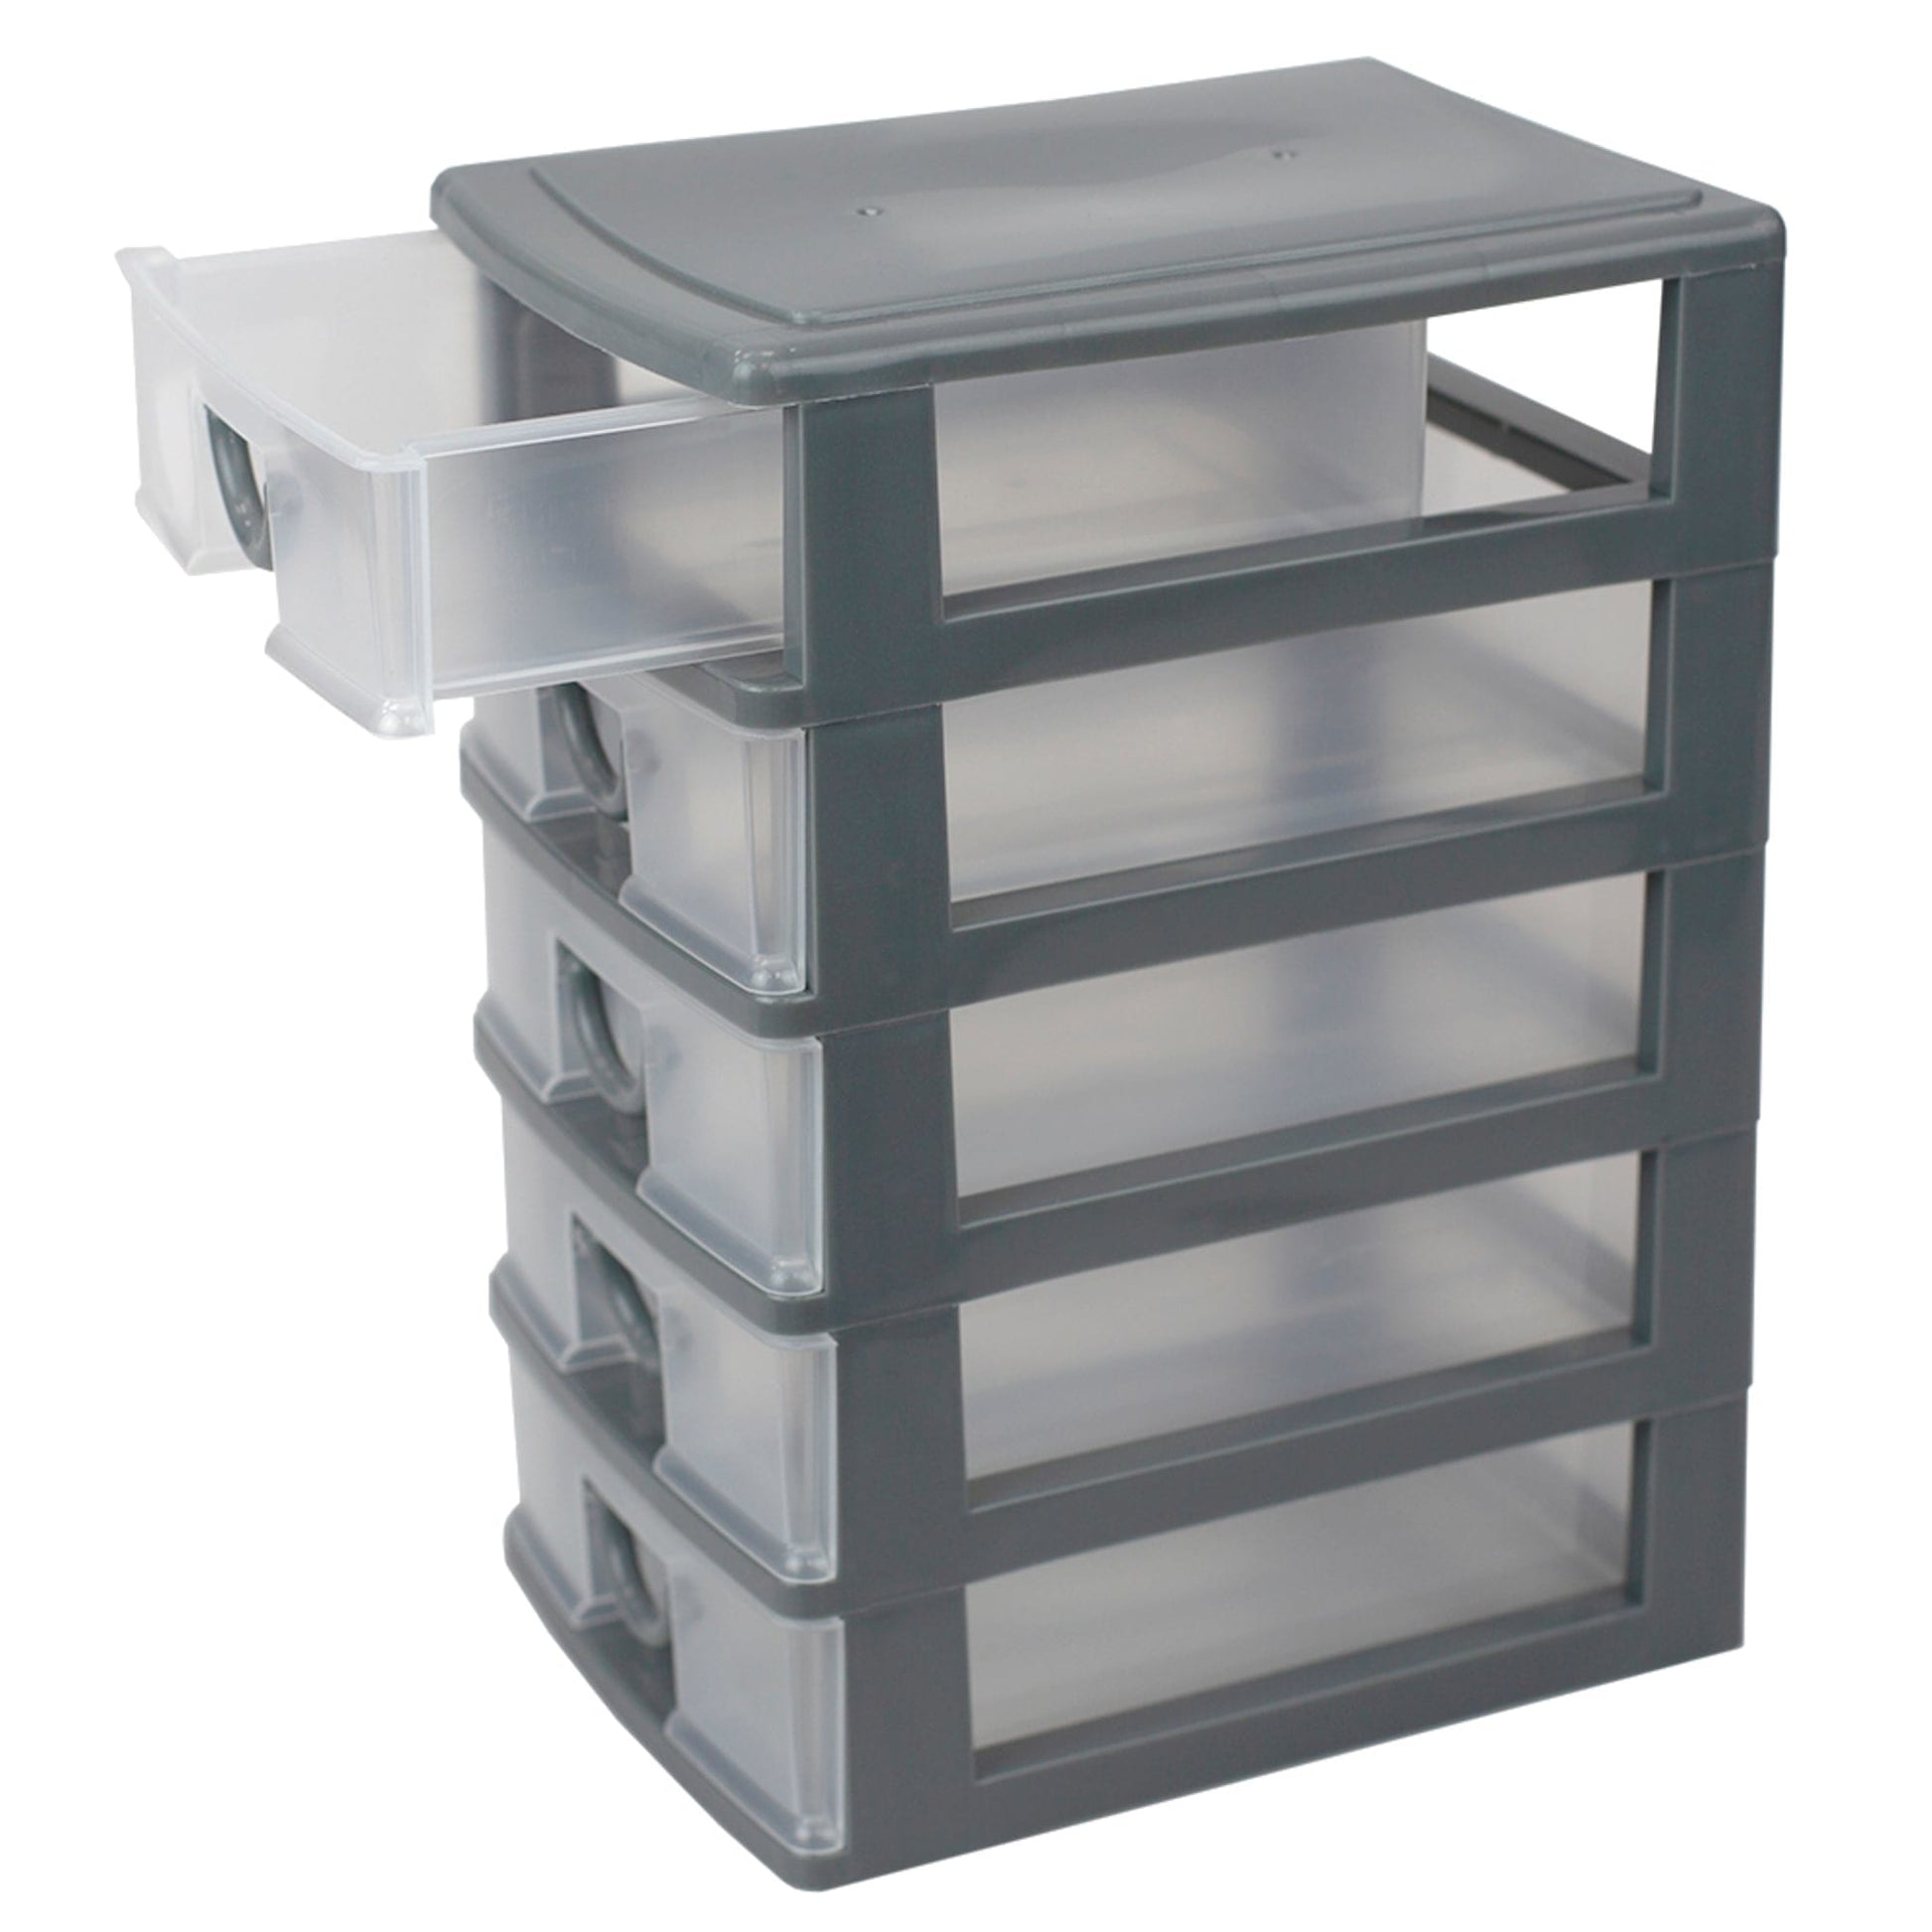 Home Basics Grey Storage Drawer Tower 9.25-in H x 6.8-in W x 5.25